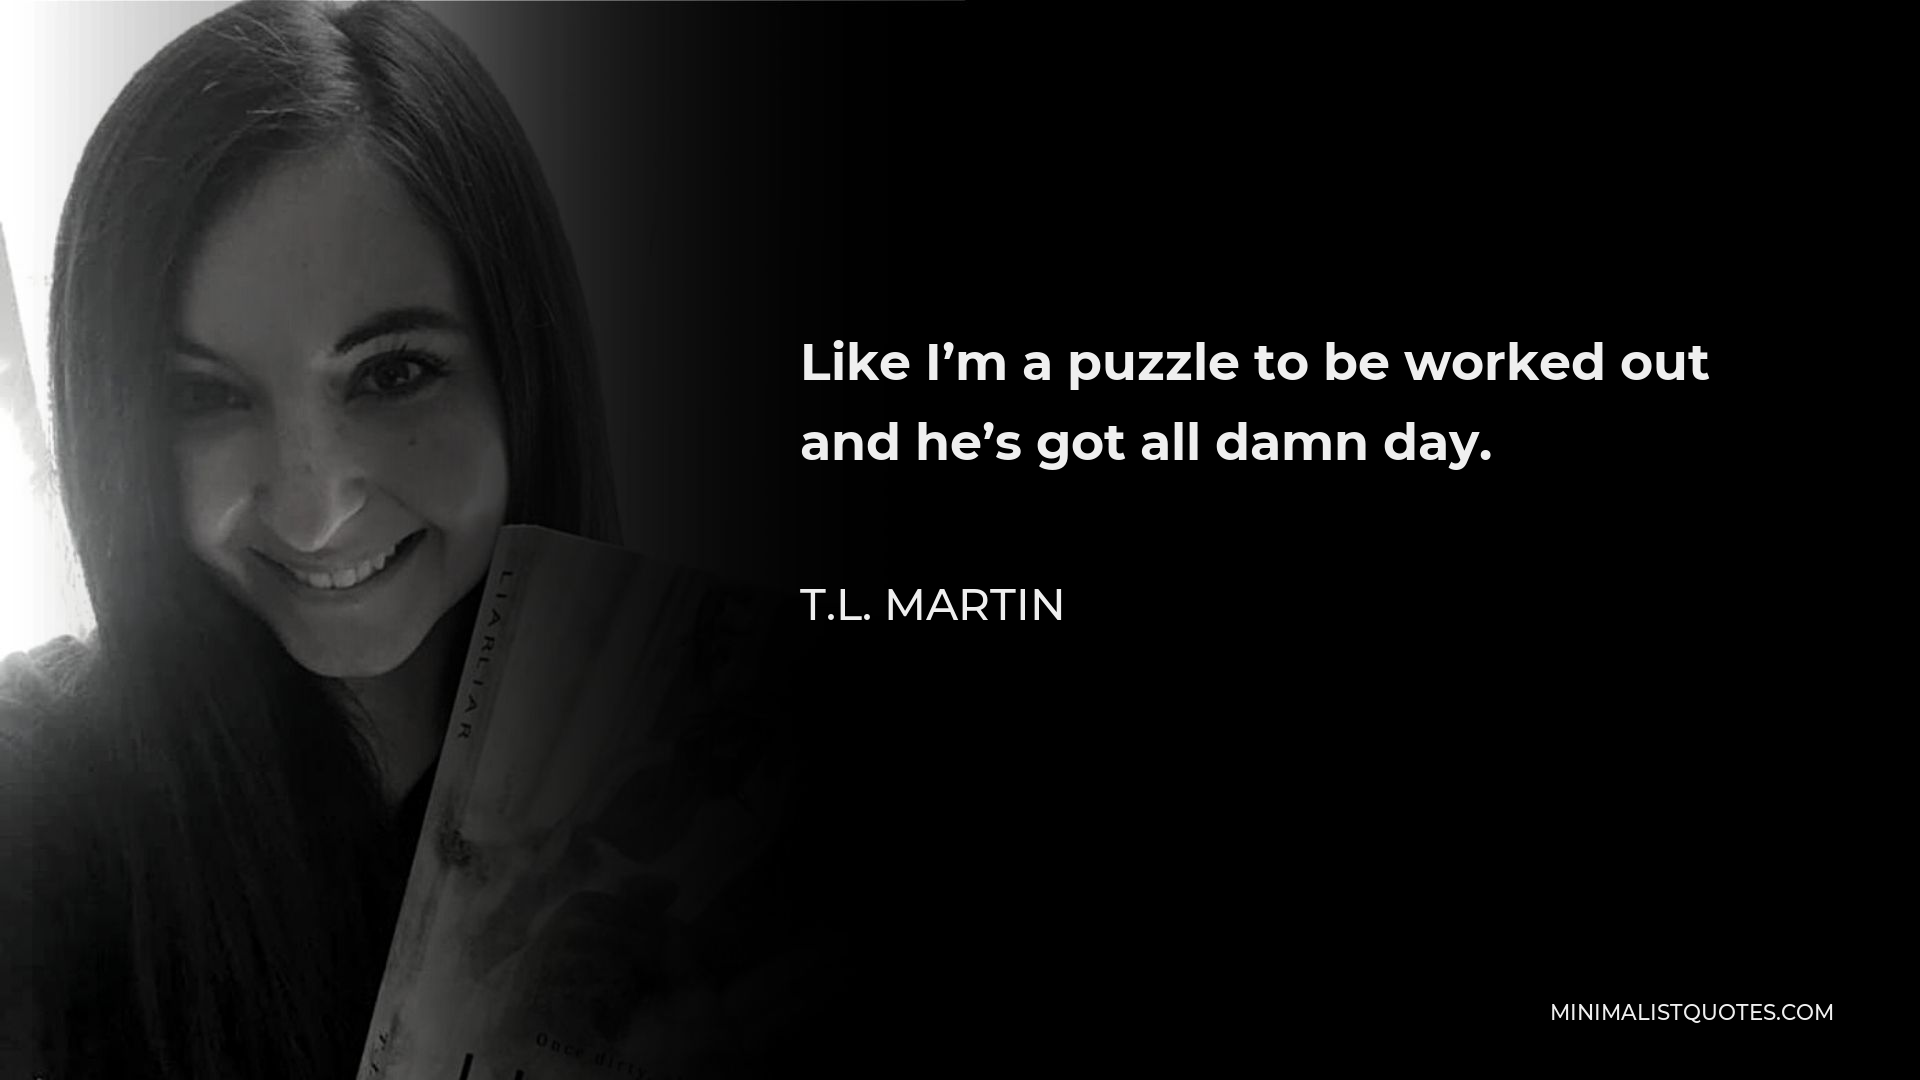 T.L. Martin Quote - Like I’m a puzzle to be worked out and he’s got all damn day.